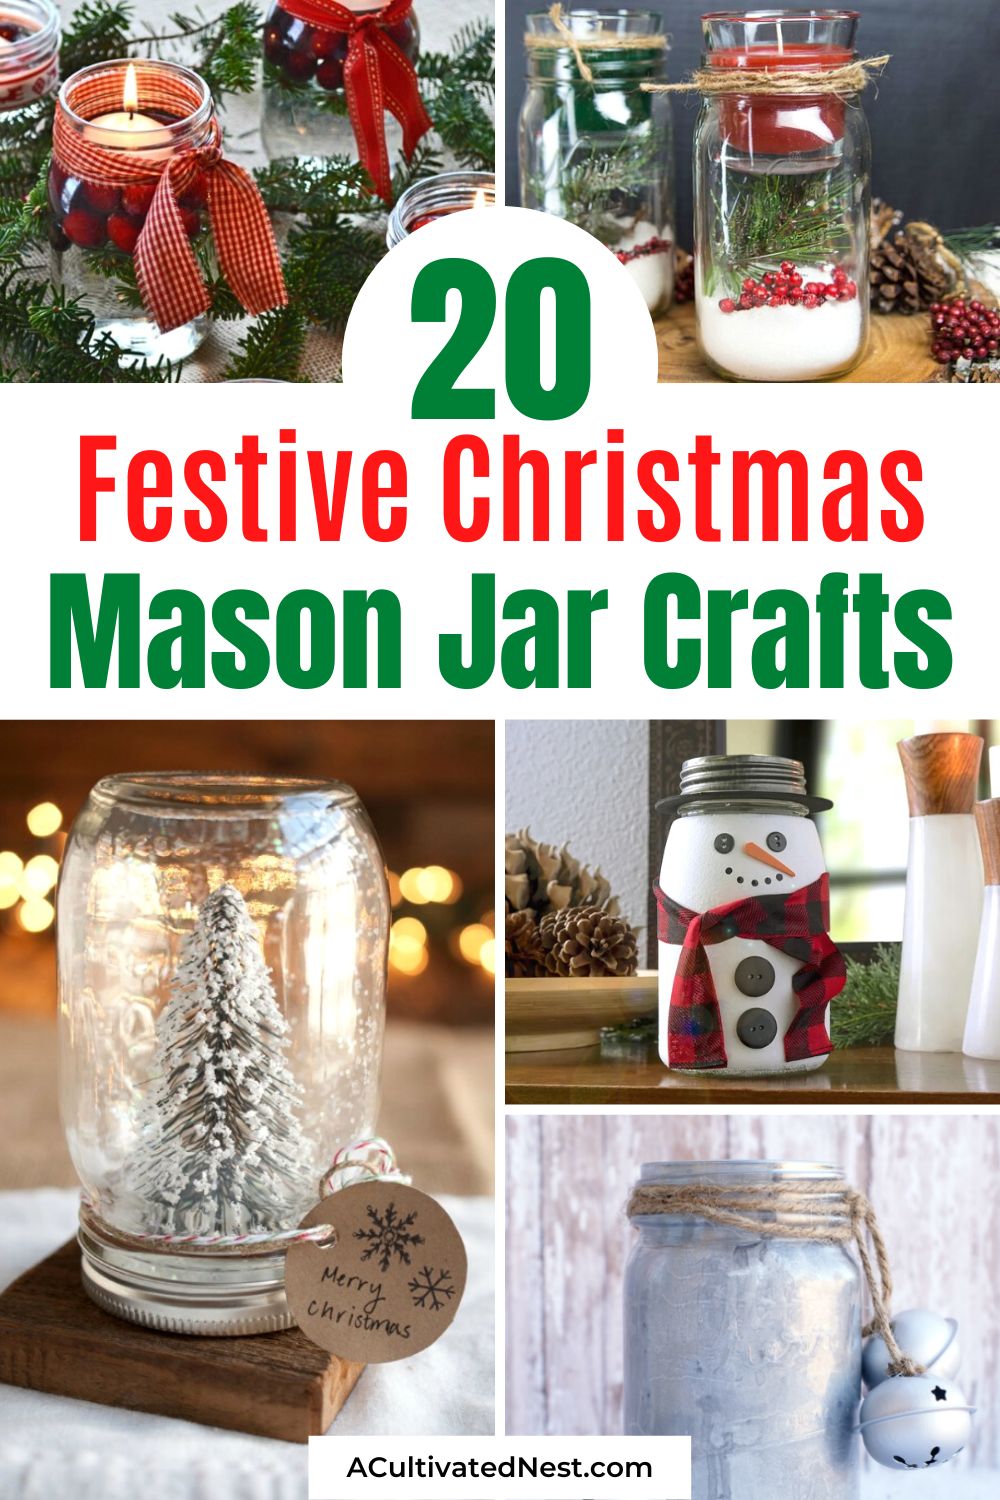 20 Festive Christmas Mason Jar Crafts- Looking for a frugal way to decorate your home for Christmas? Try making one of these festive Christmas Mason jar crafts! | DIY holiday decor project, decor to make with Mason jars, DIY Christmas decorations, #DIY #Christmas #masonJars #diyProjects #ACultivatedNest